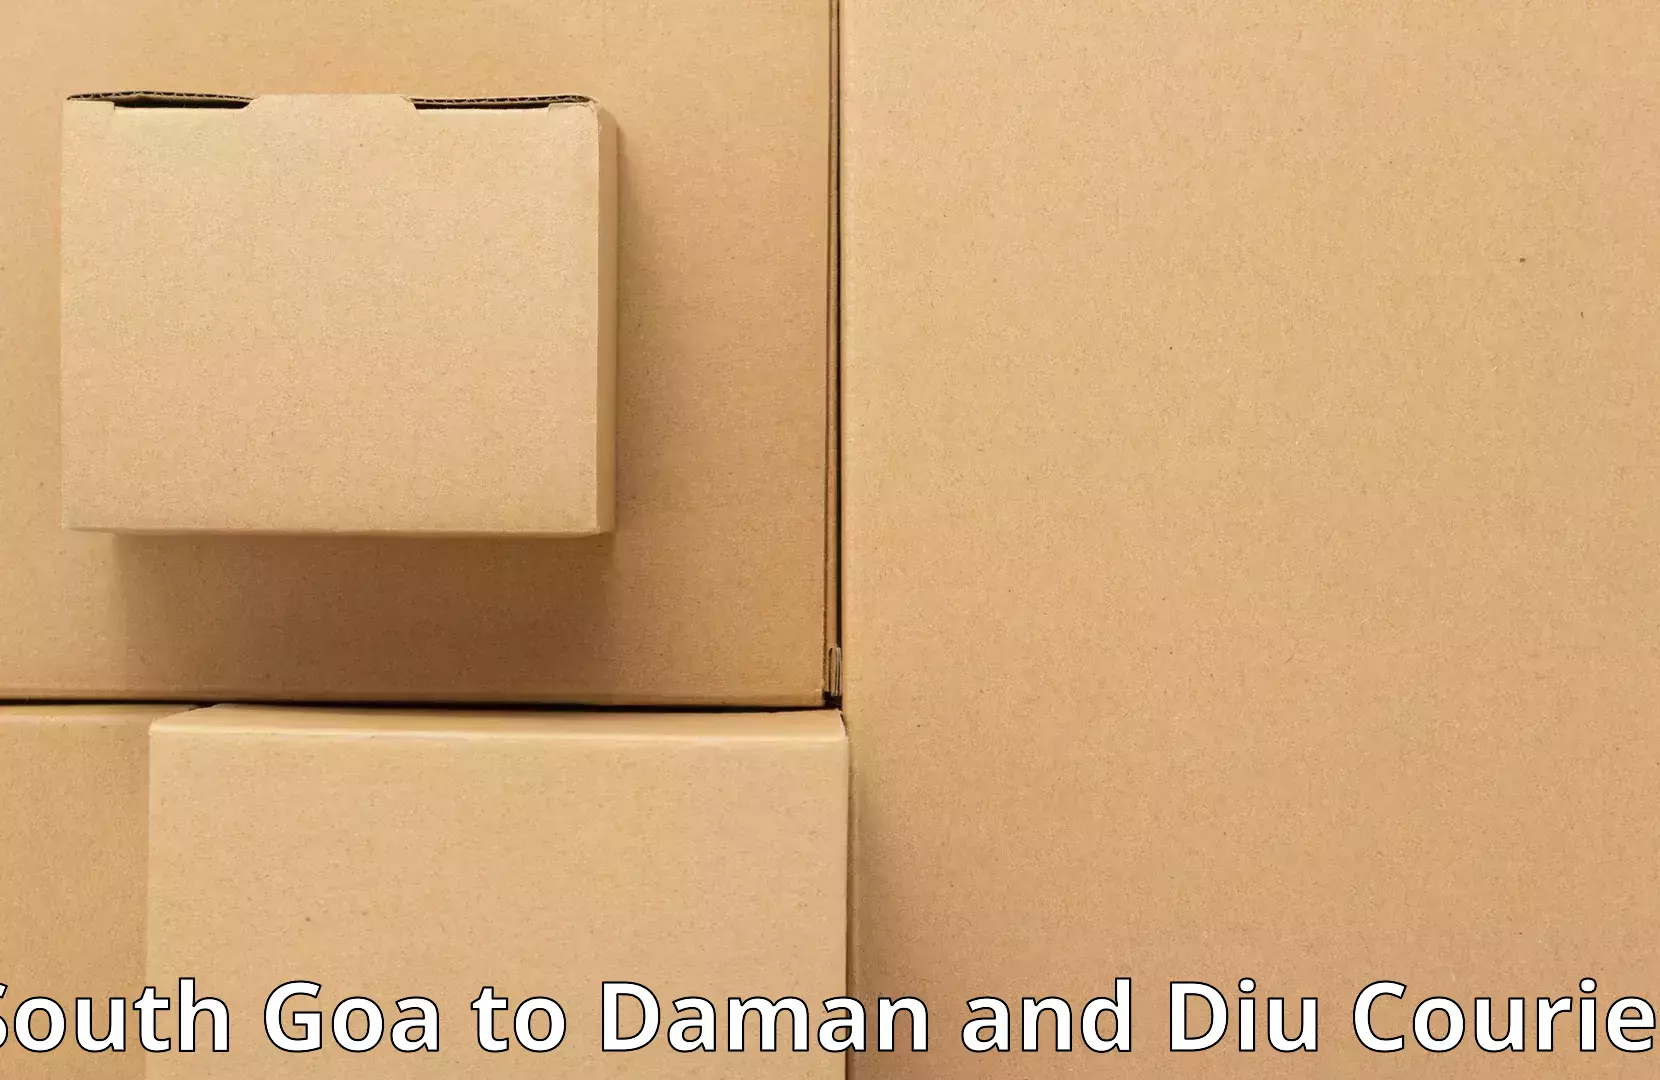 Residential moving experts South Goa to Daman and Diu